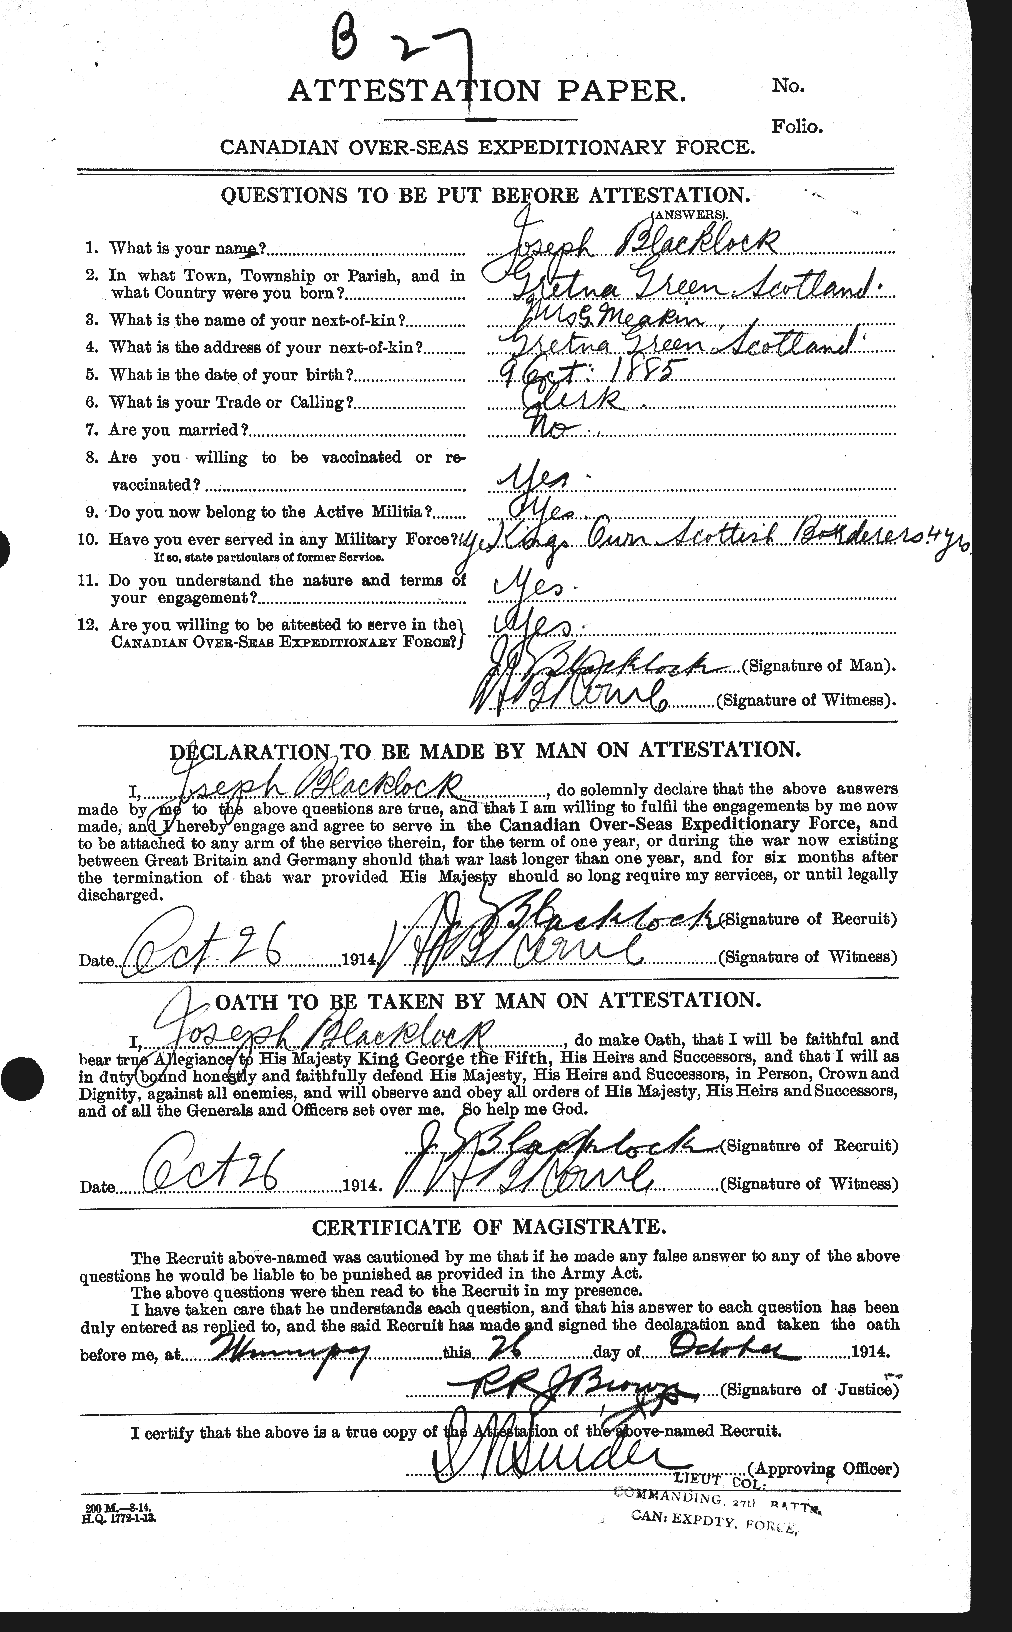 Personnel Records of the First World War - CEF 248279a